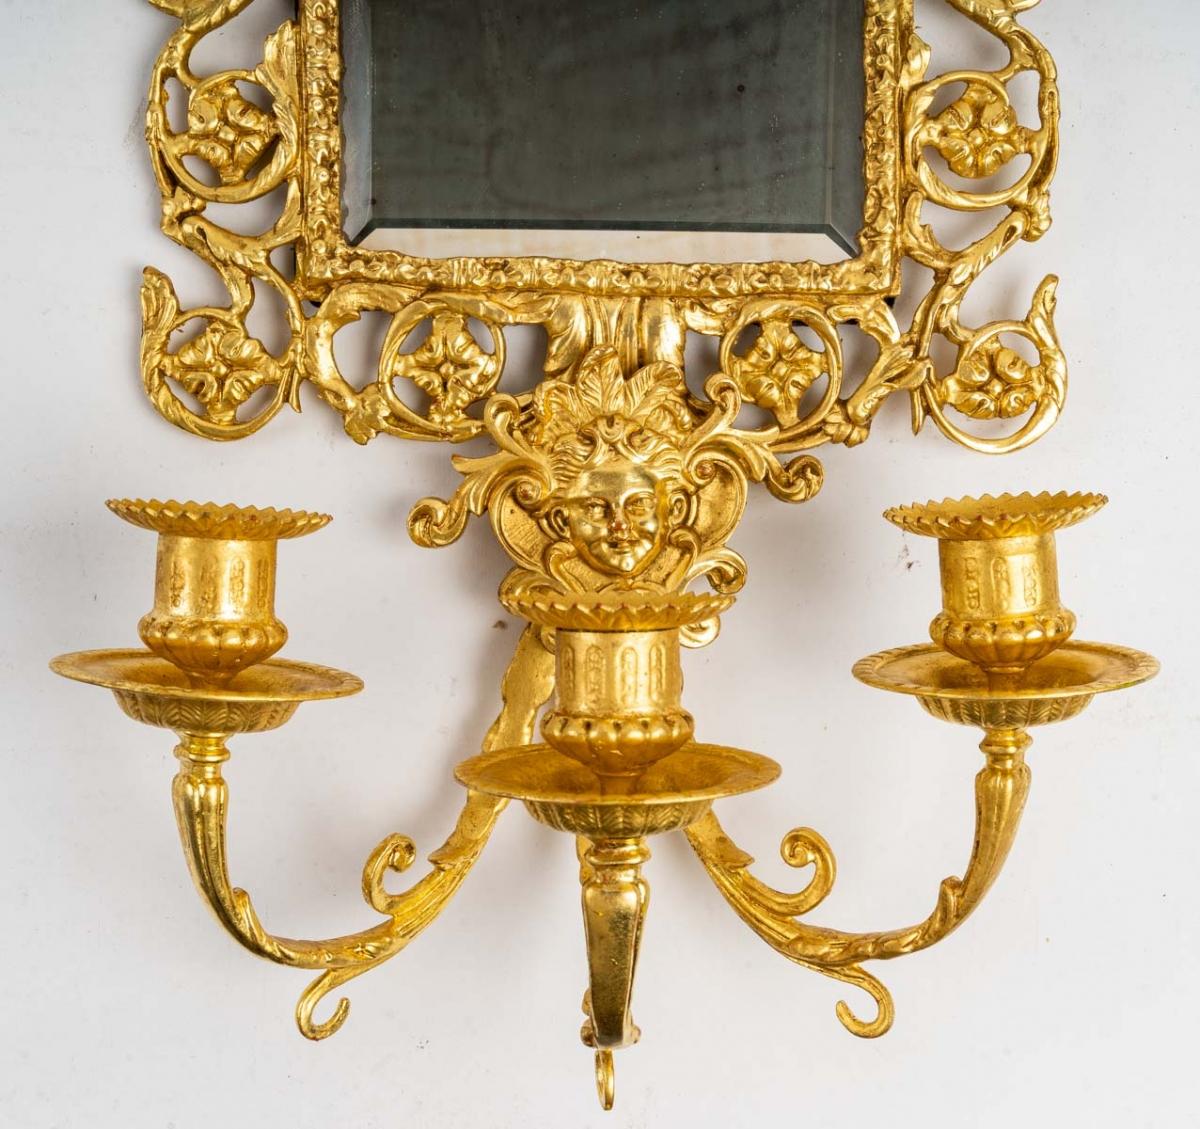 Pair of bronze gilt leaf mirror wall lights
The three arms of light are carried by a very nice mascaron of a smiling cherub.
Period : 19th century 
Dimensions : Height: 56cm x width: 23cm.